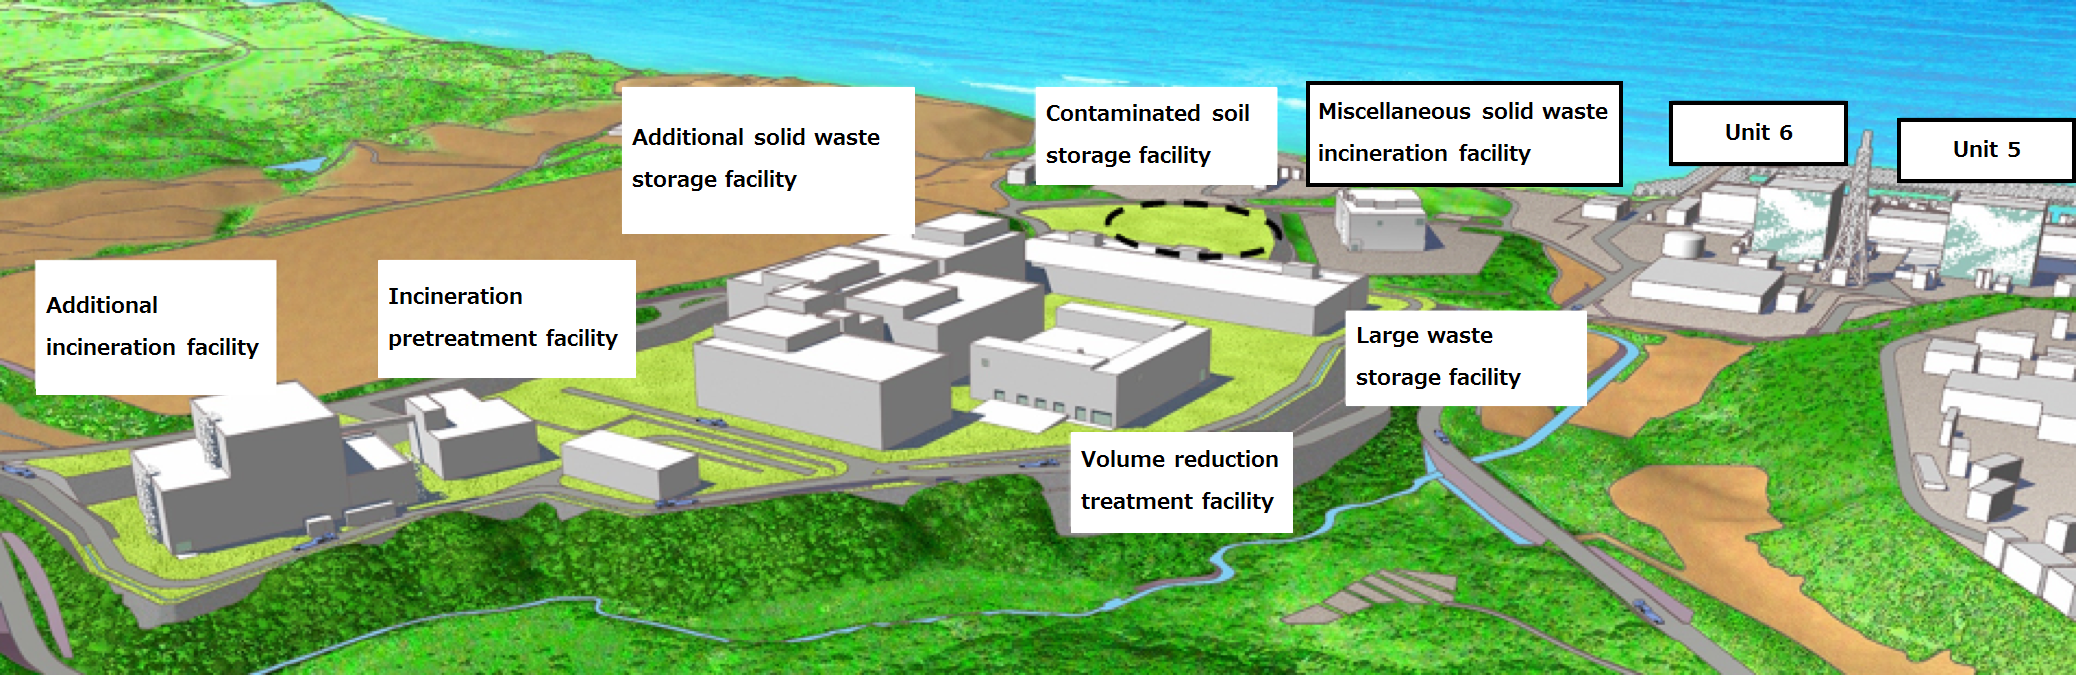 Planned waste materials-related facilities (illustration)